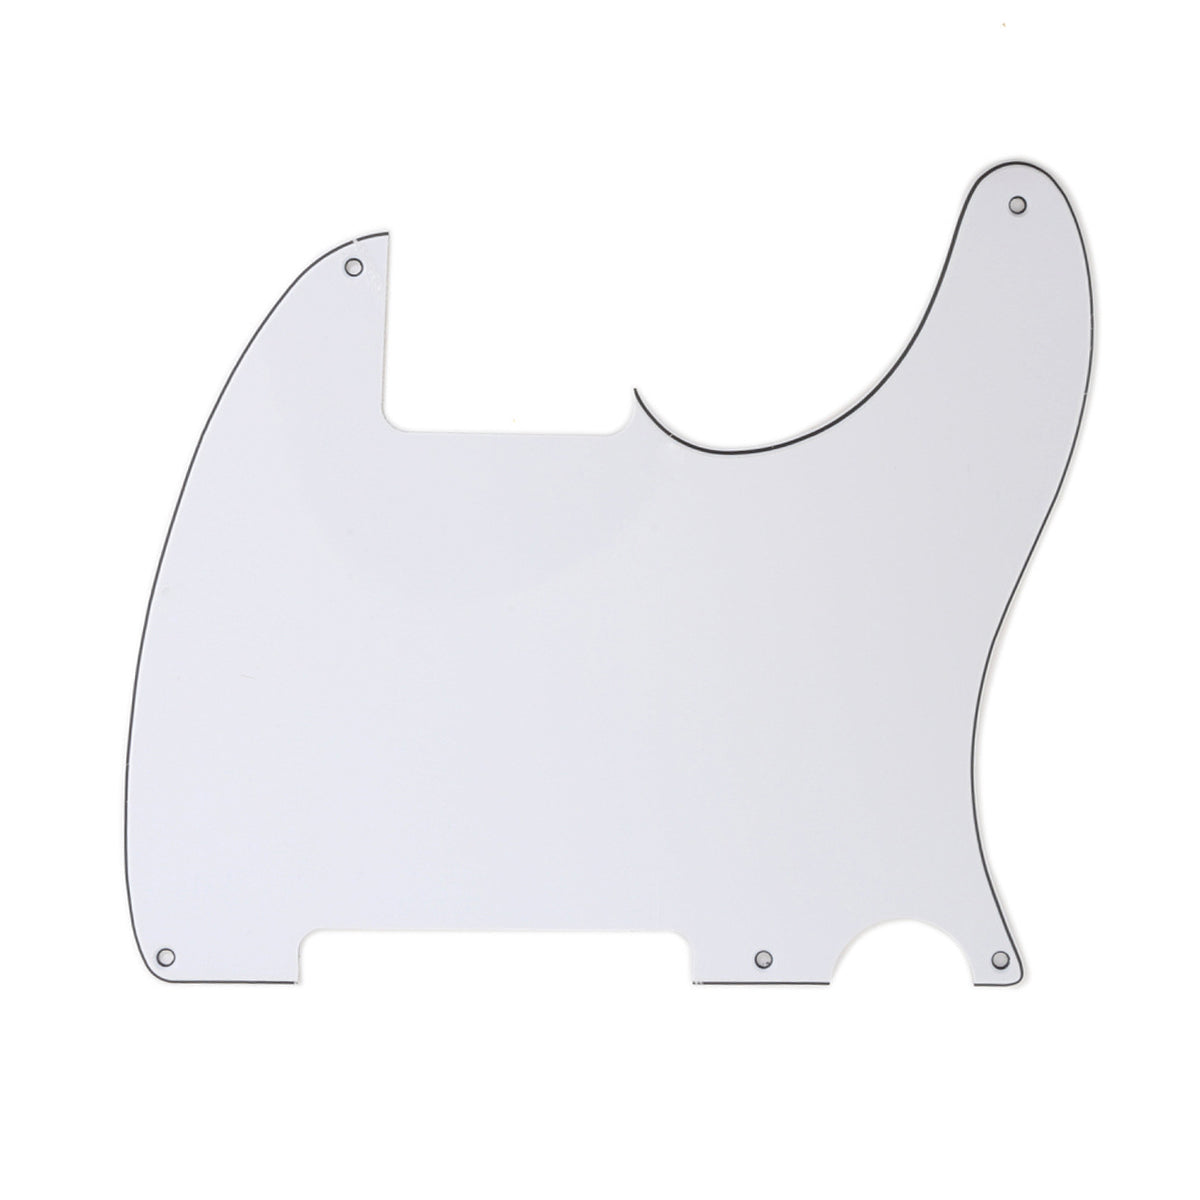 Musiclily 5 Hole Tele Pickguard Blank for Fender USA/Mexican Telecaster Esquire Guitar, 3Ply White